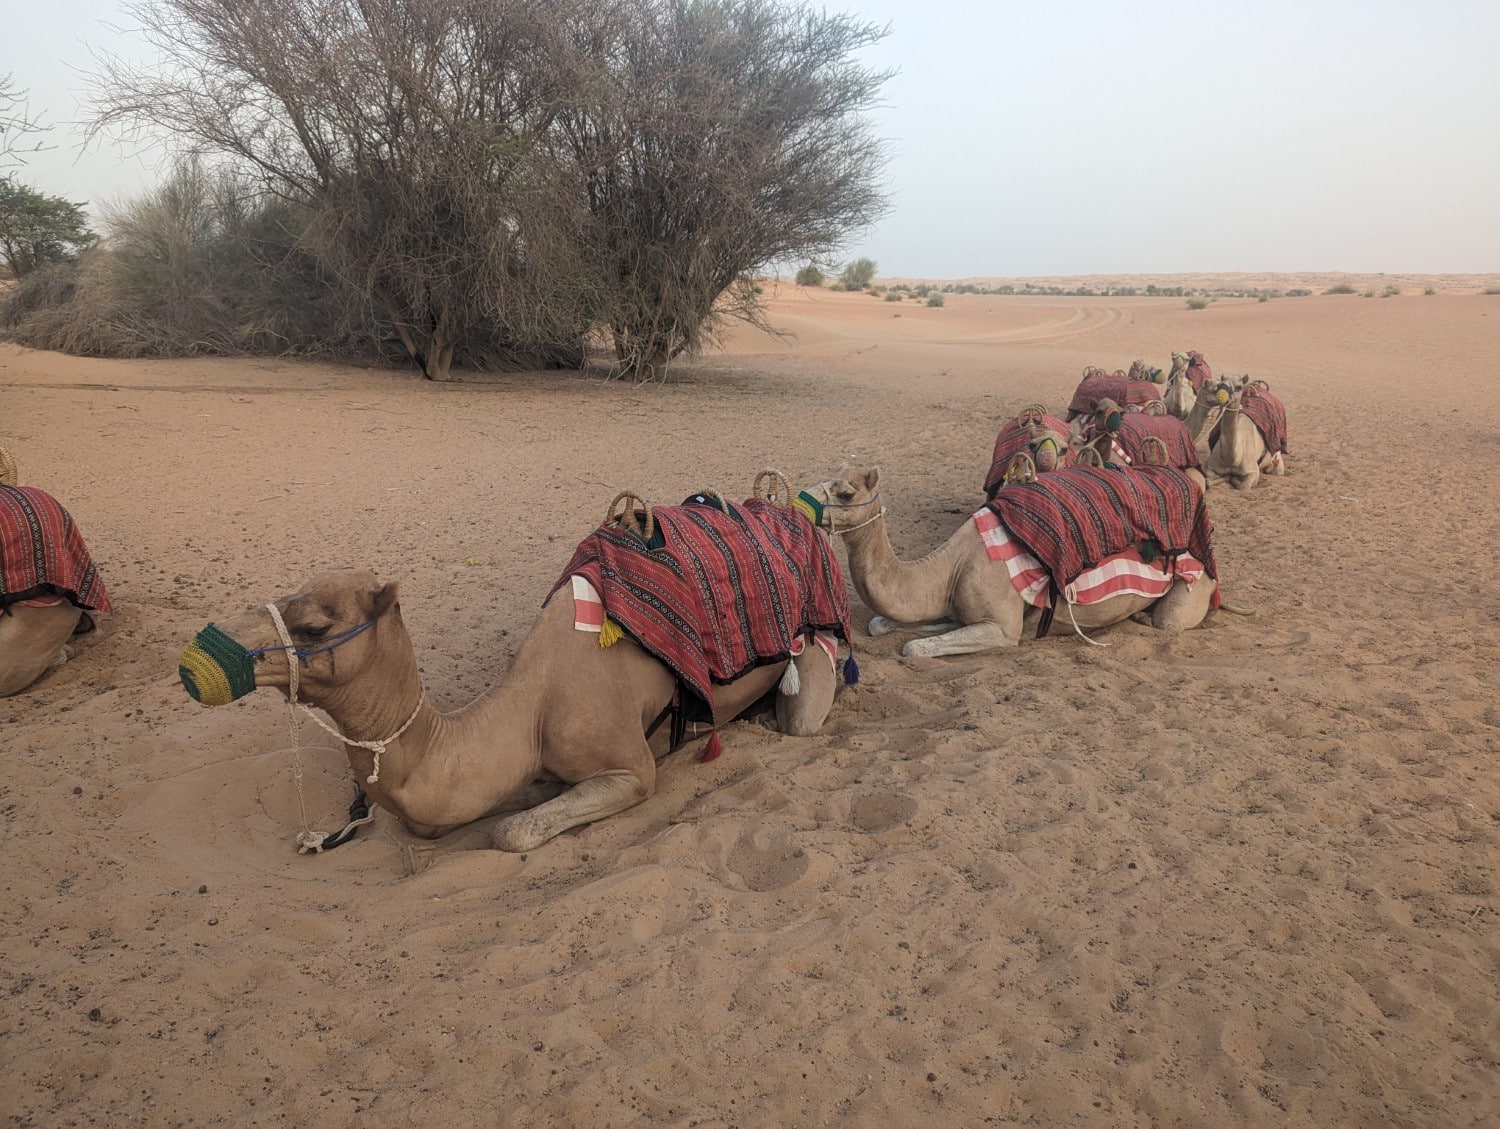 Camels lying down for a rest during the Al Maha camel trek activity.